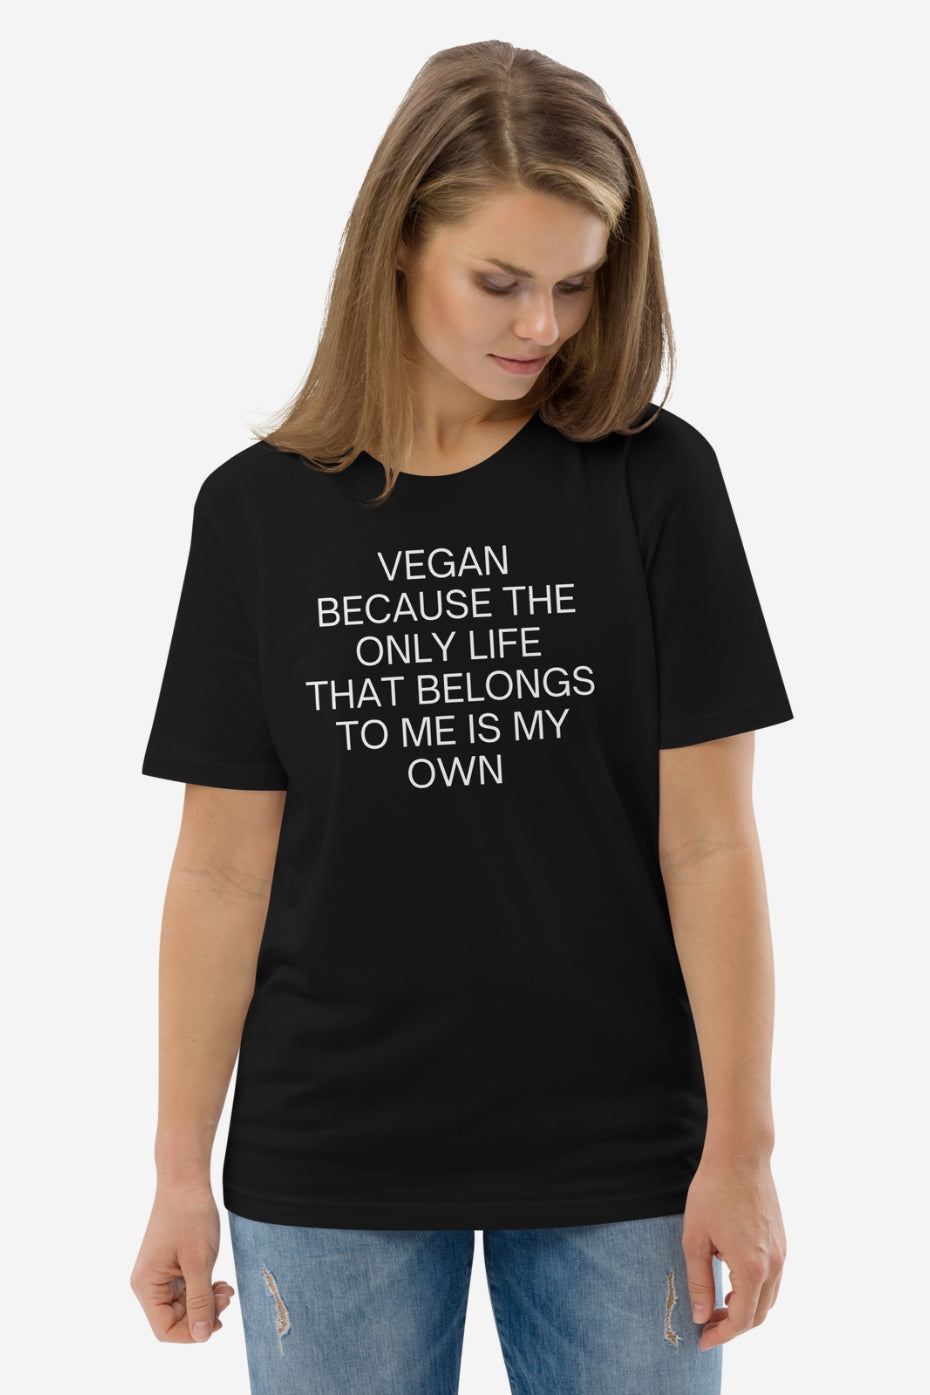 The Only Life That Belongs To Me Unisex T-Shirt